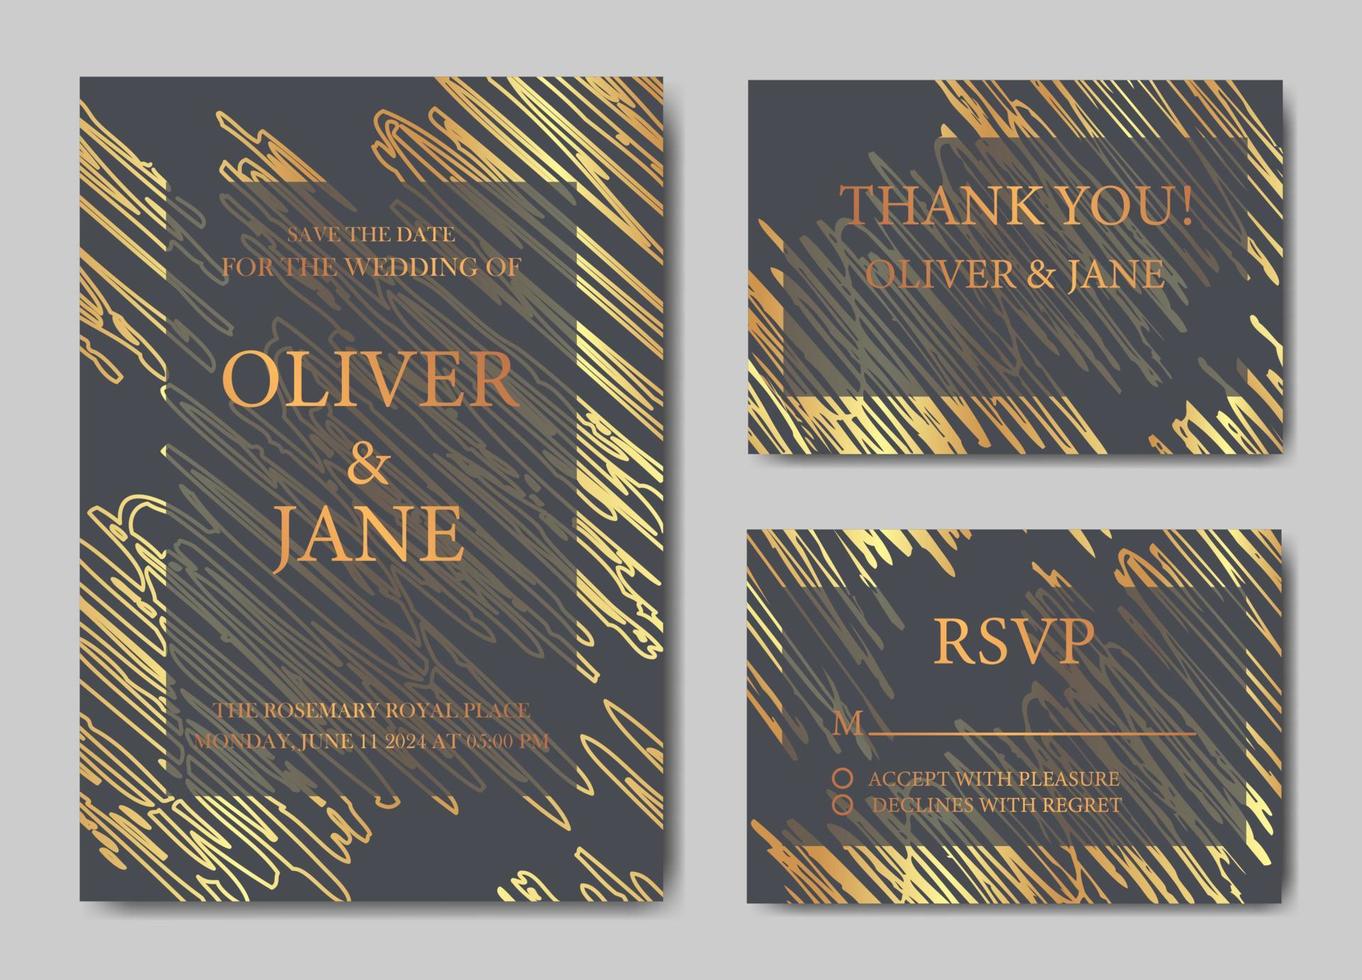 Vintage wedding invitation templates. Cover design with gold ornamental leaves. Vector traditional decorative backgrounds.